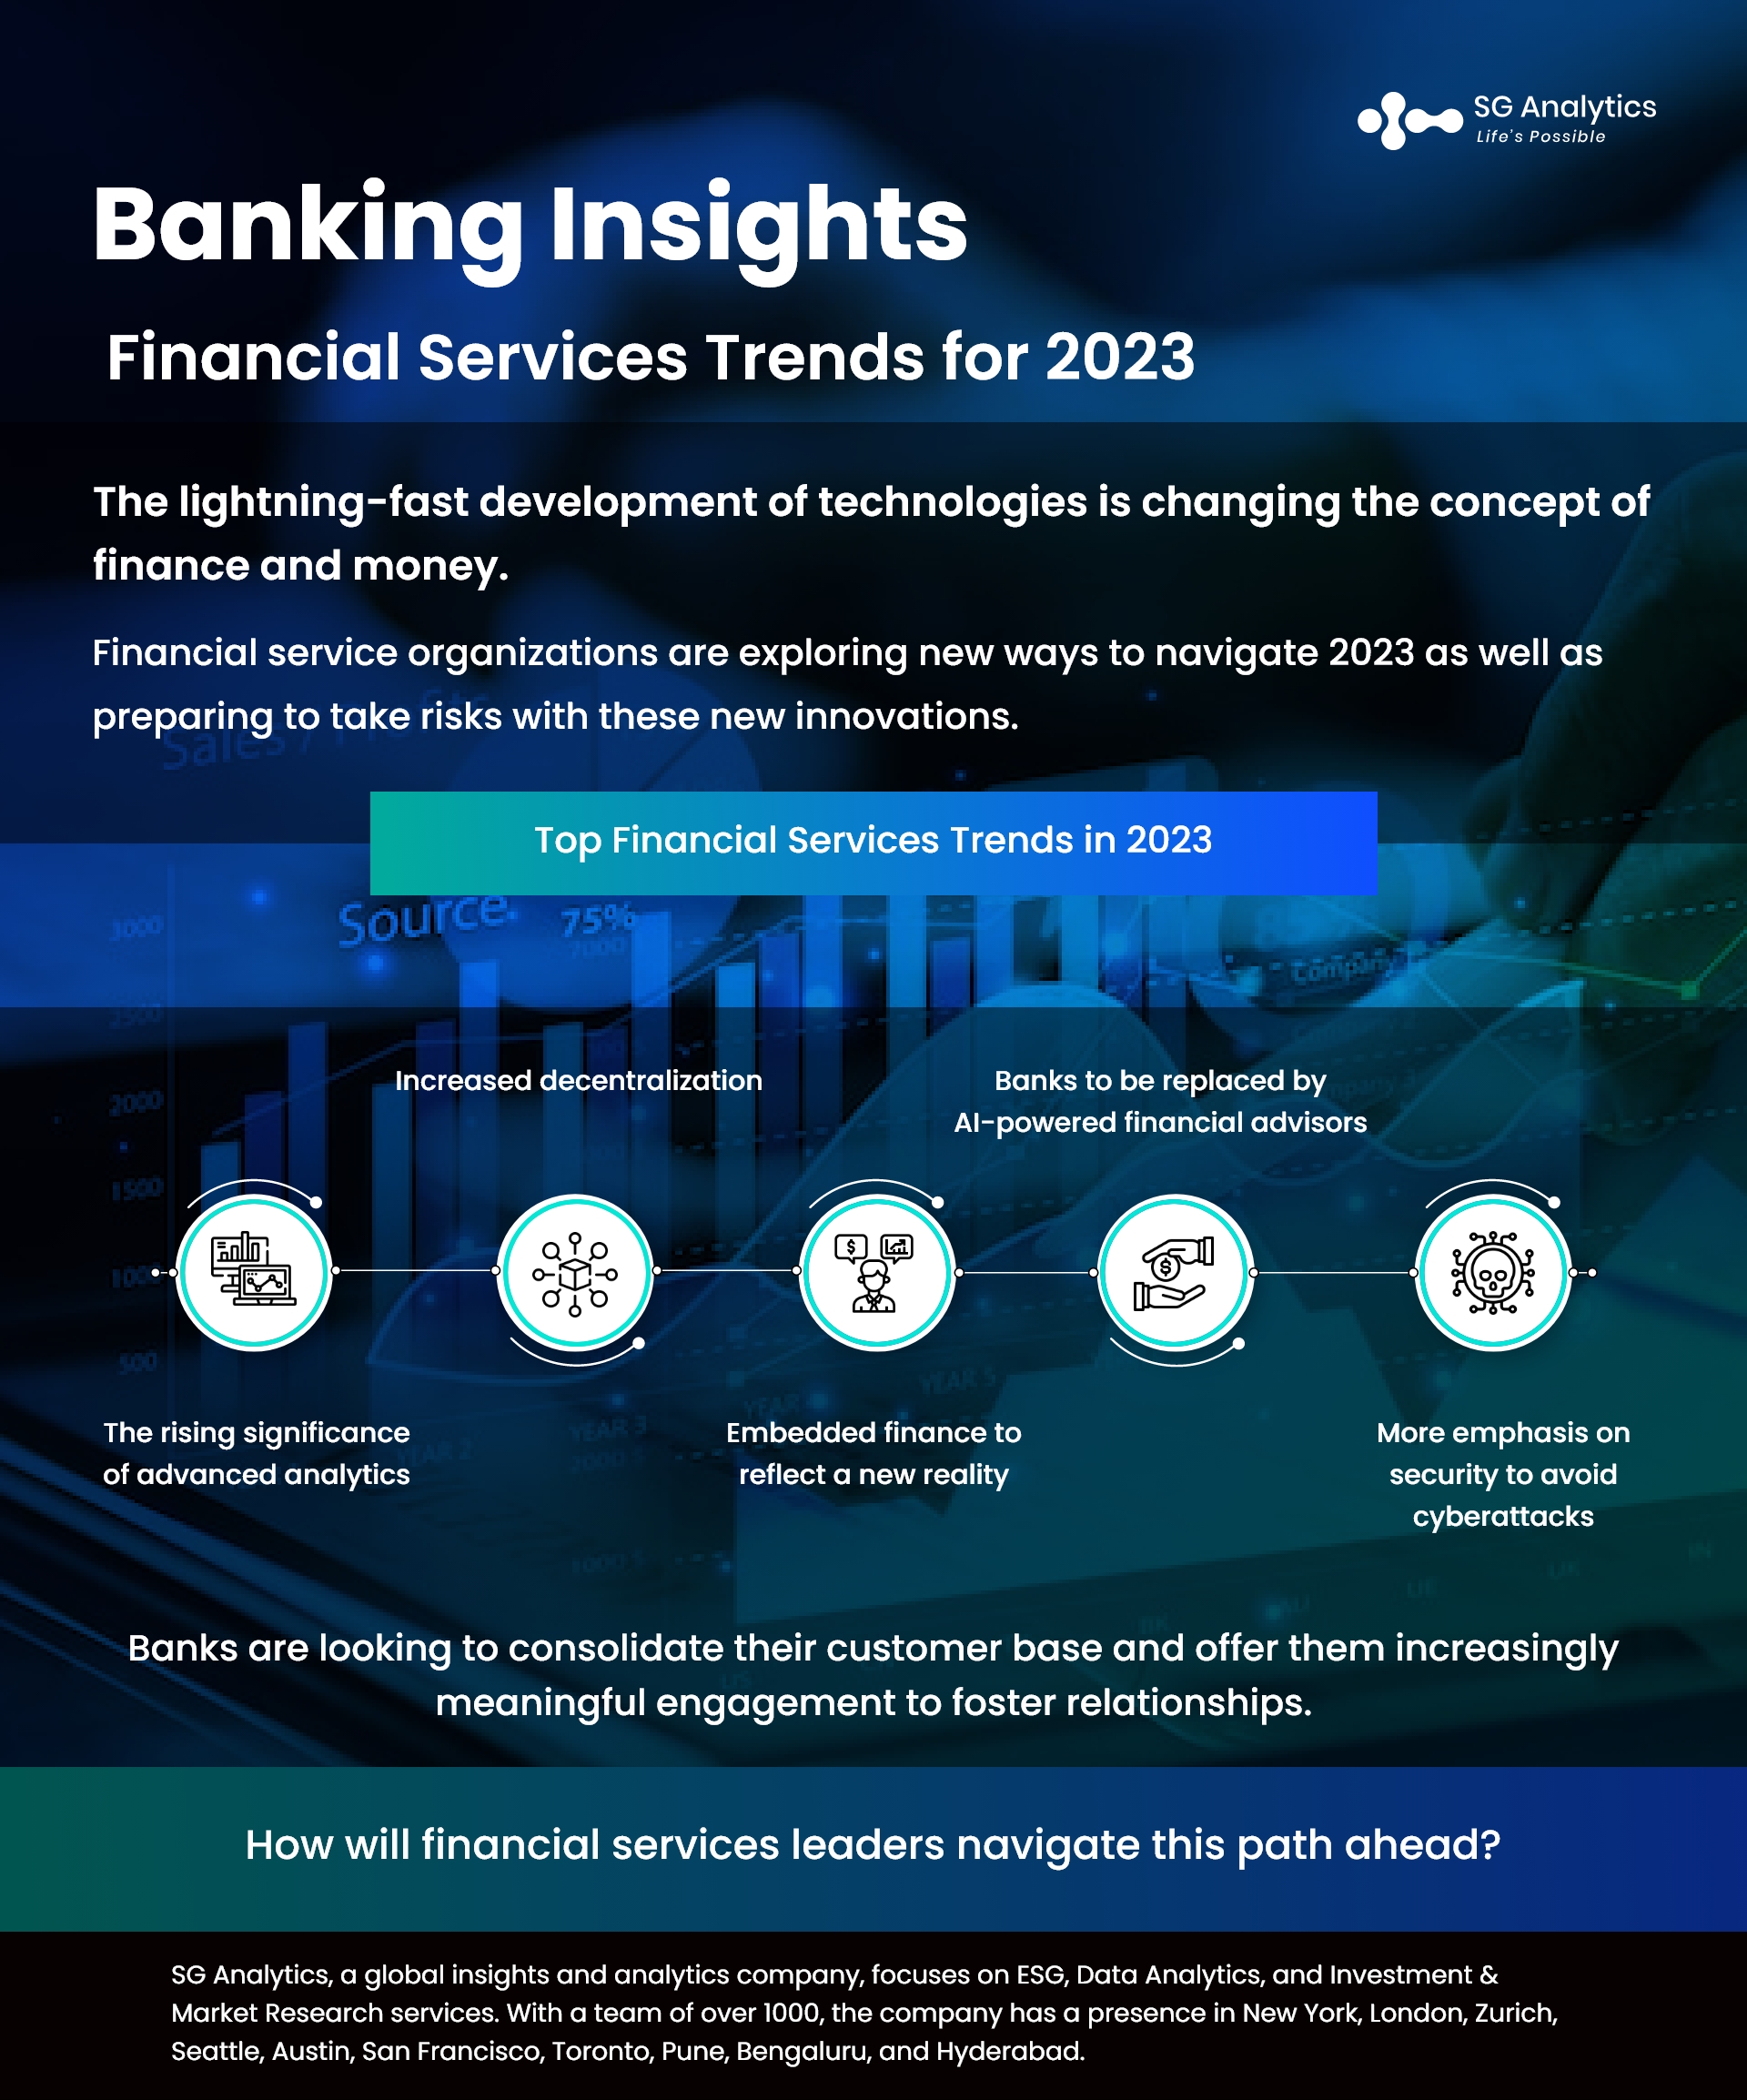 Banking Insights: Financial Services Trends for 2023